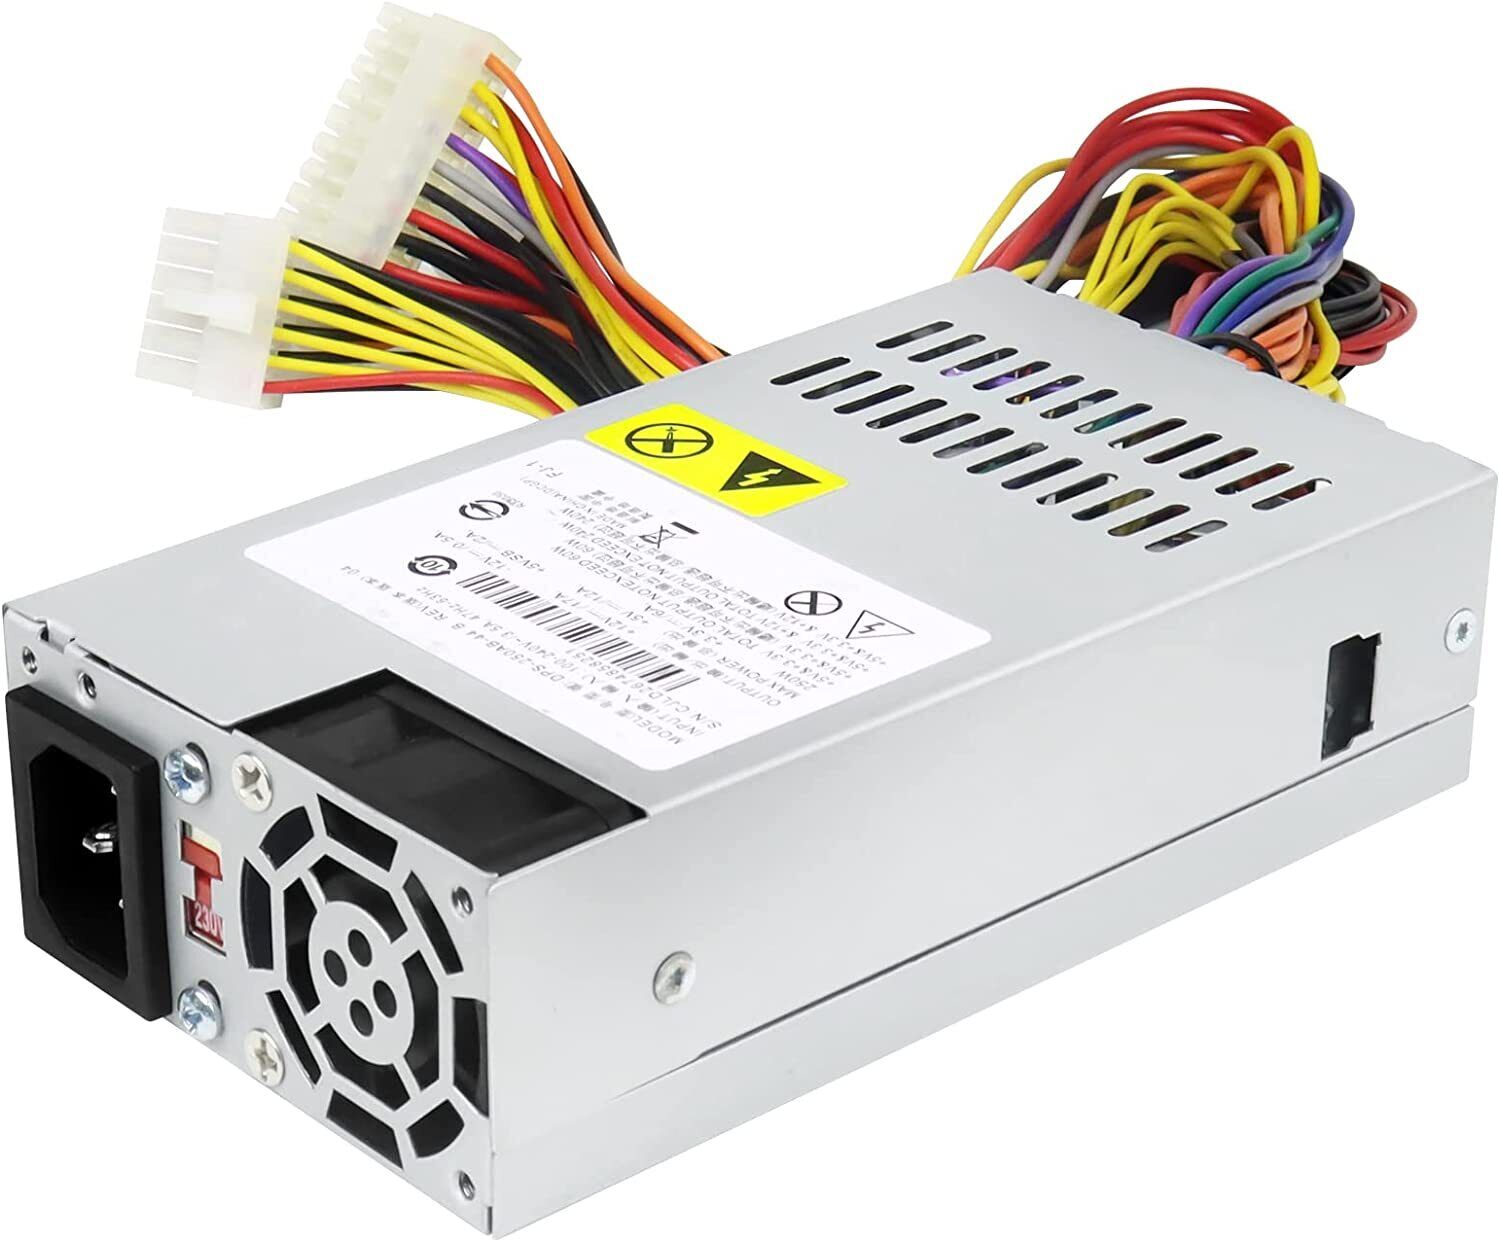 New 250W Power Supply Fors Synology DS1515+ DS2015xs RS814+ RS815+ DPS-250AB-44B